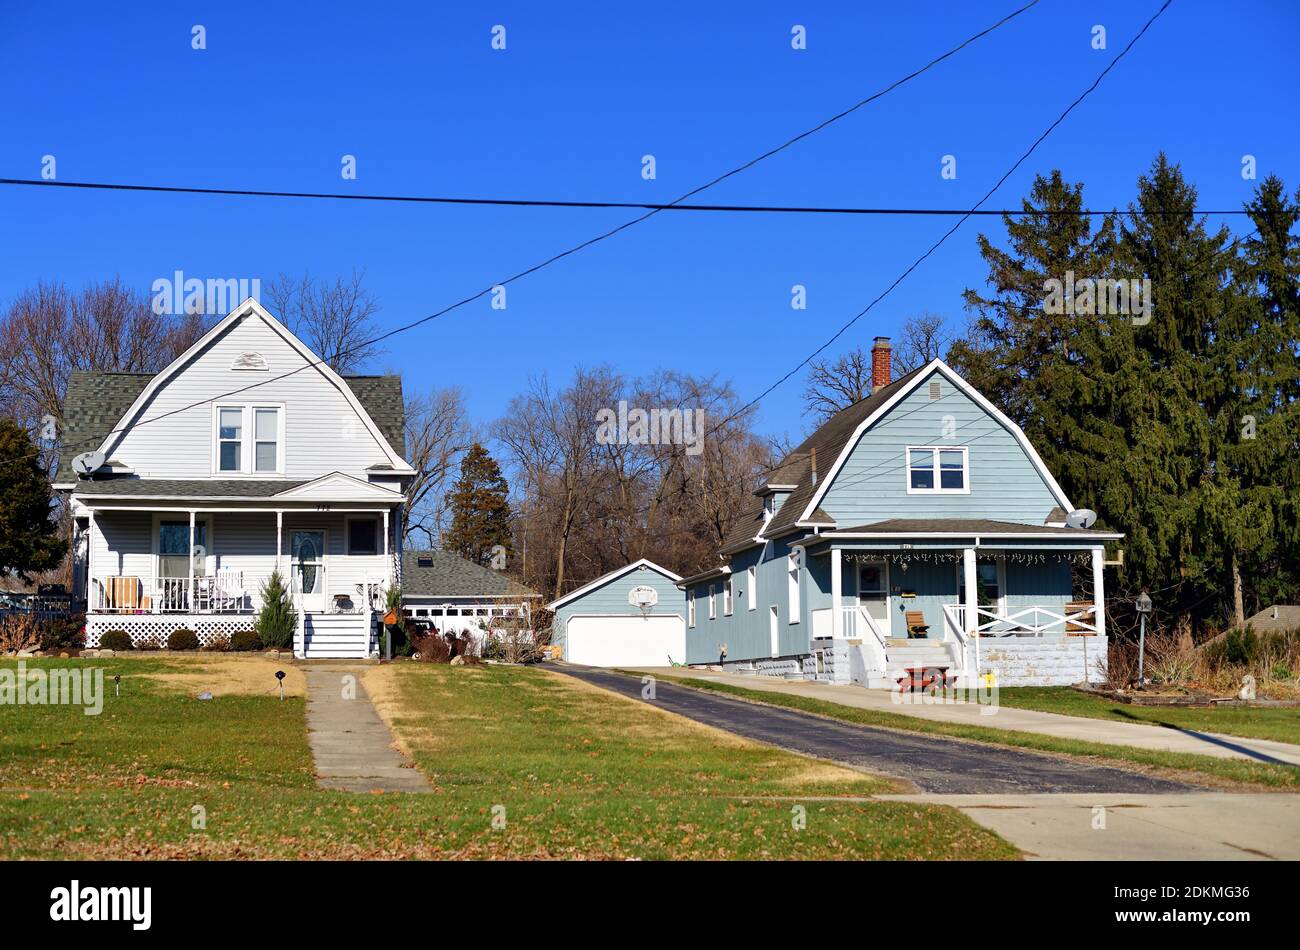 Elgin, Illinois, USA. A pair of older single family homes with detached garages sit side by side that are typical of a old city neighborhood. Stock Photo